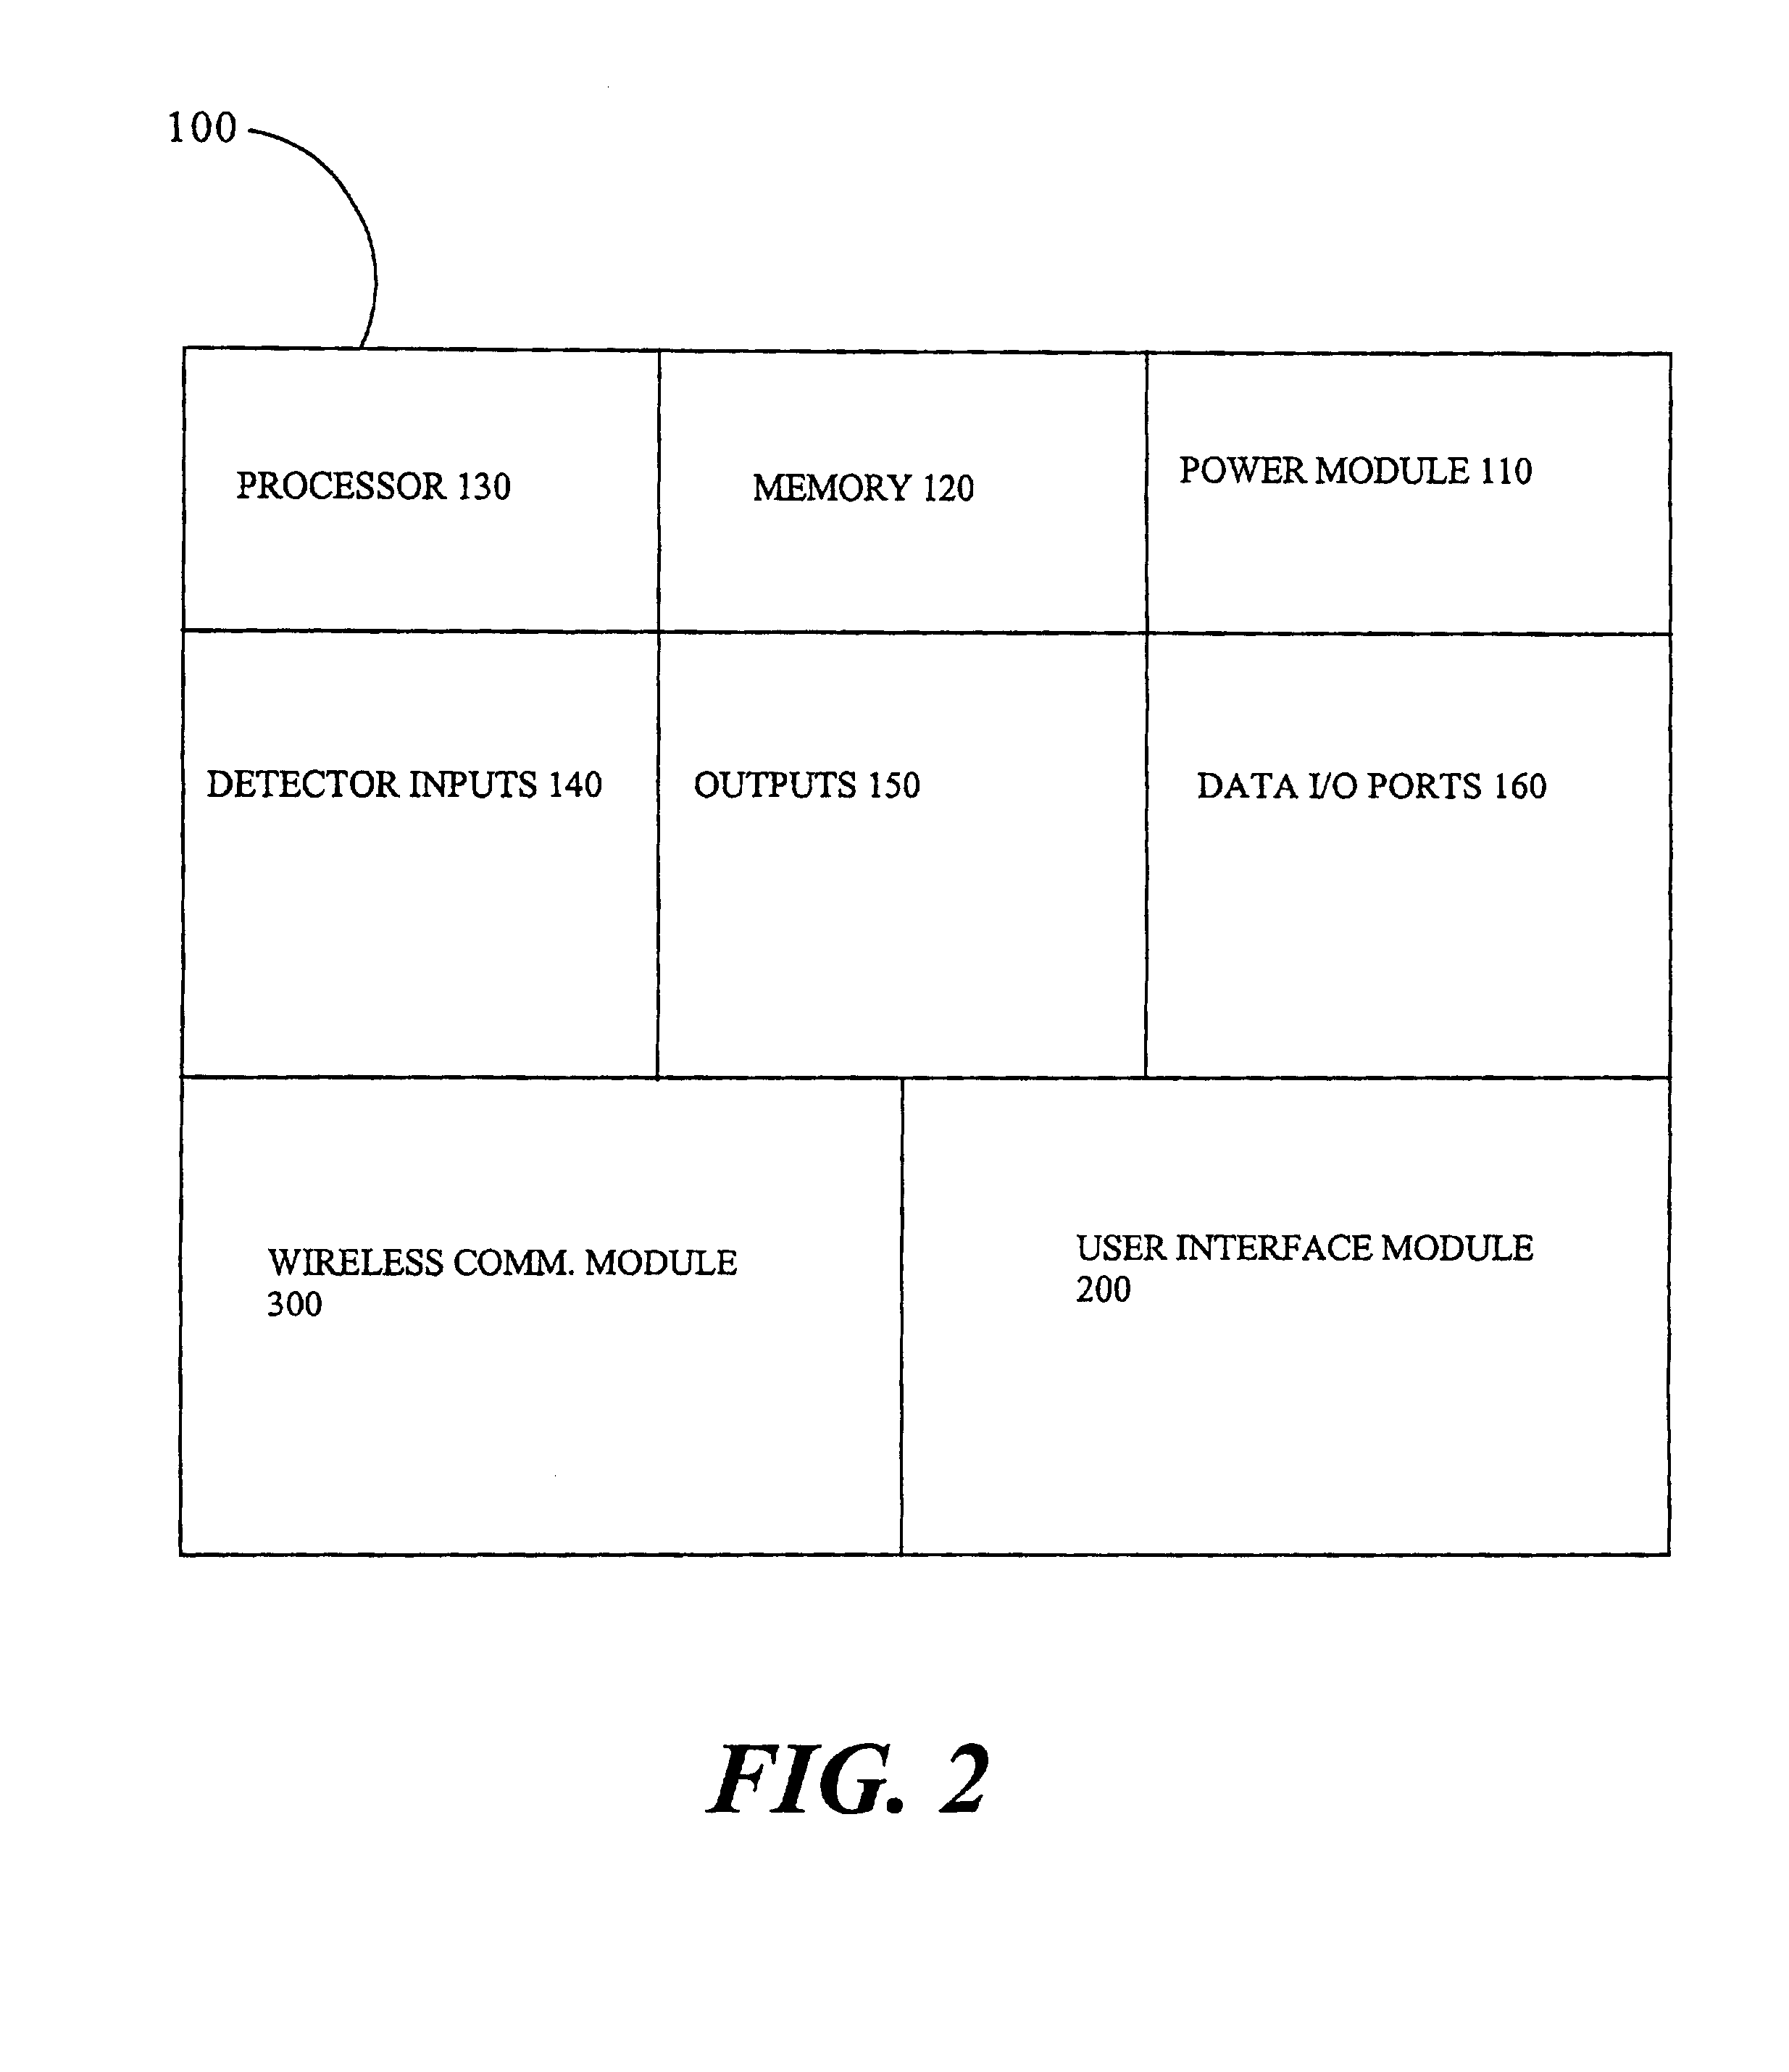 Personal medical device communication system and method